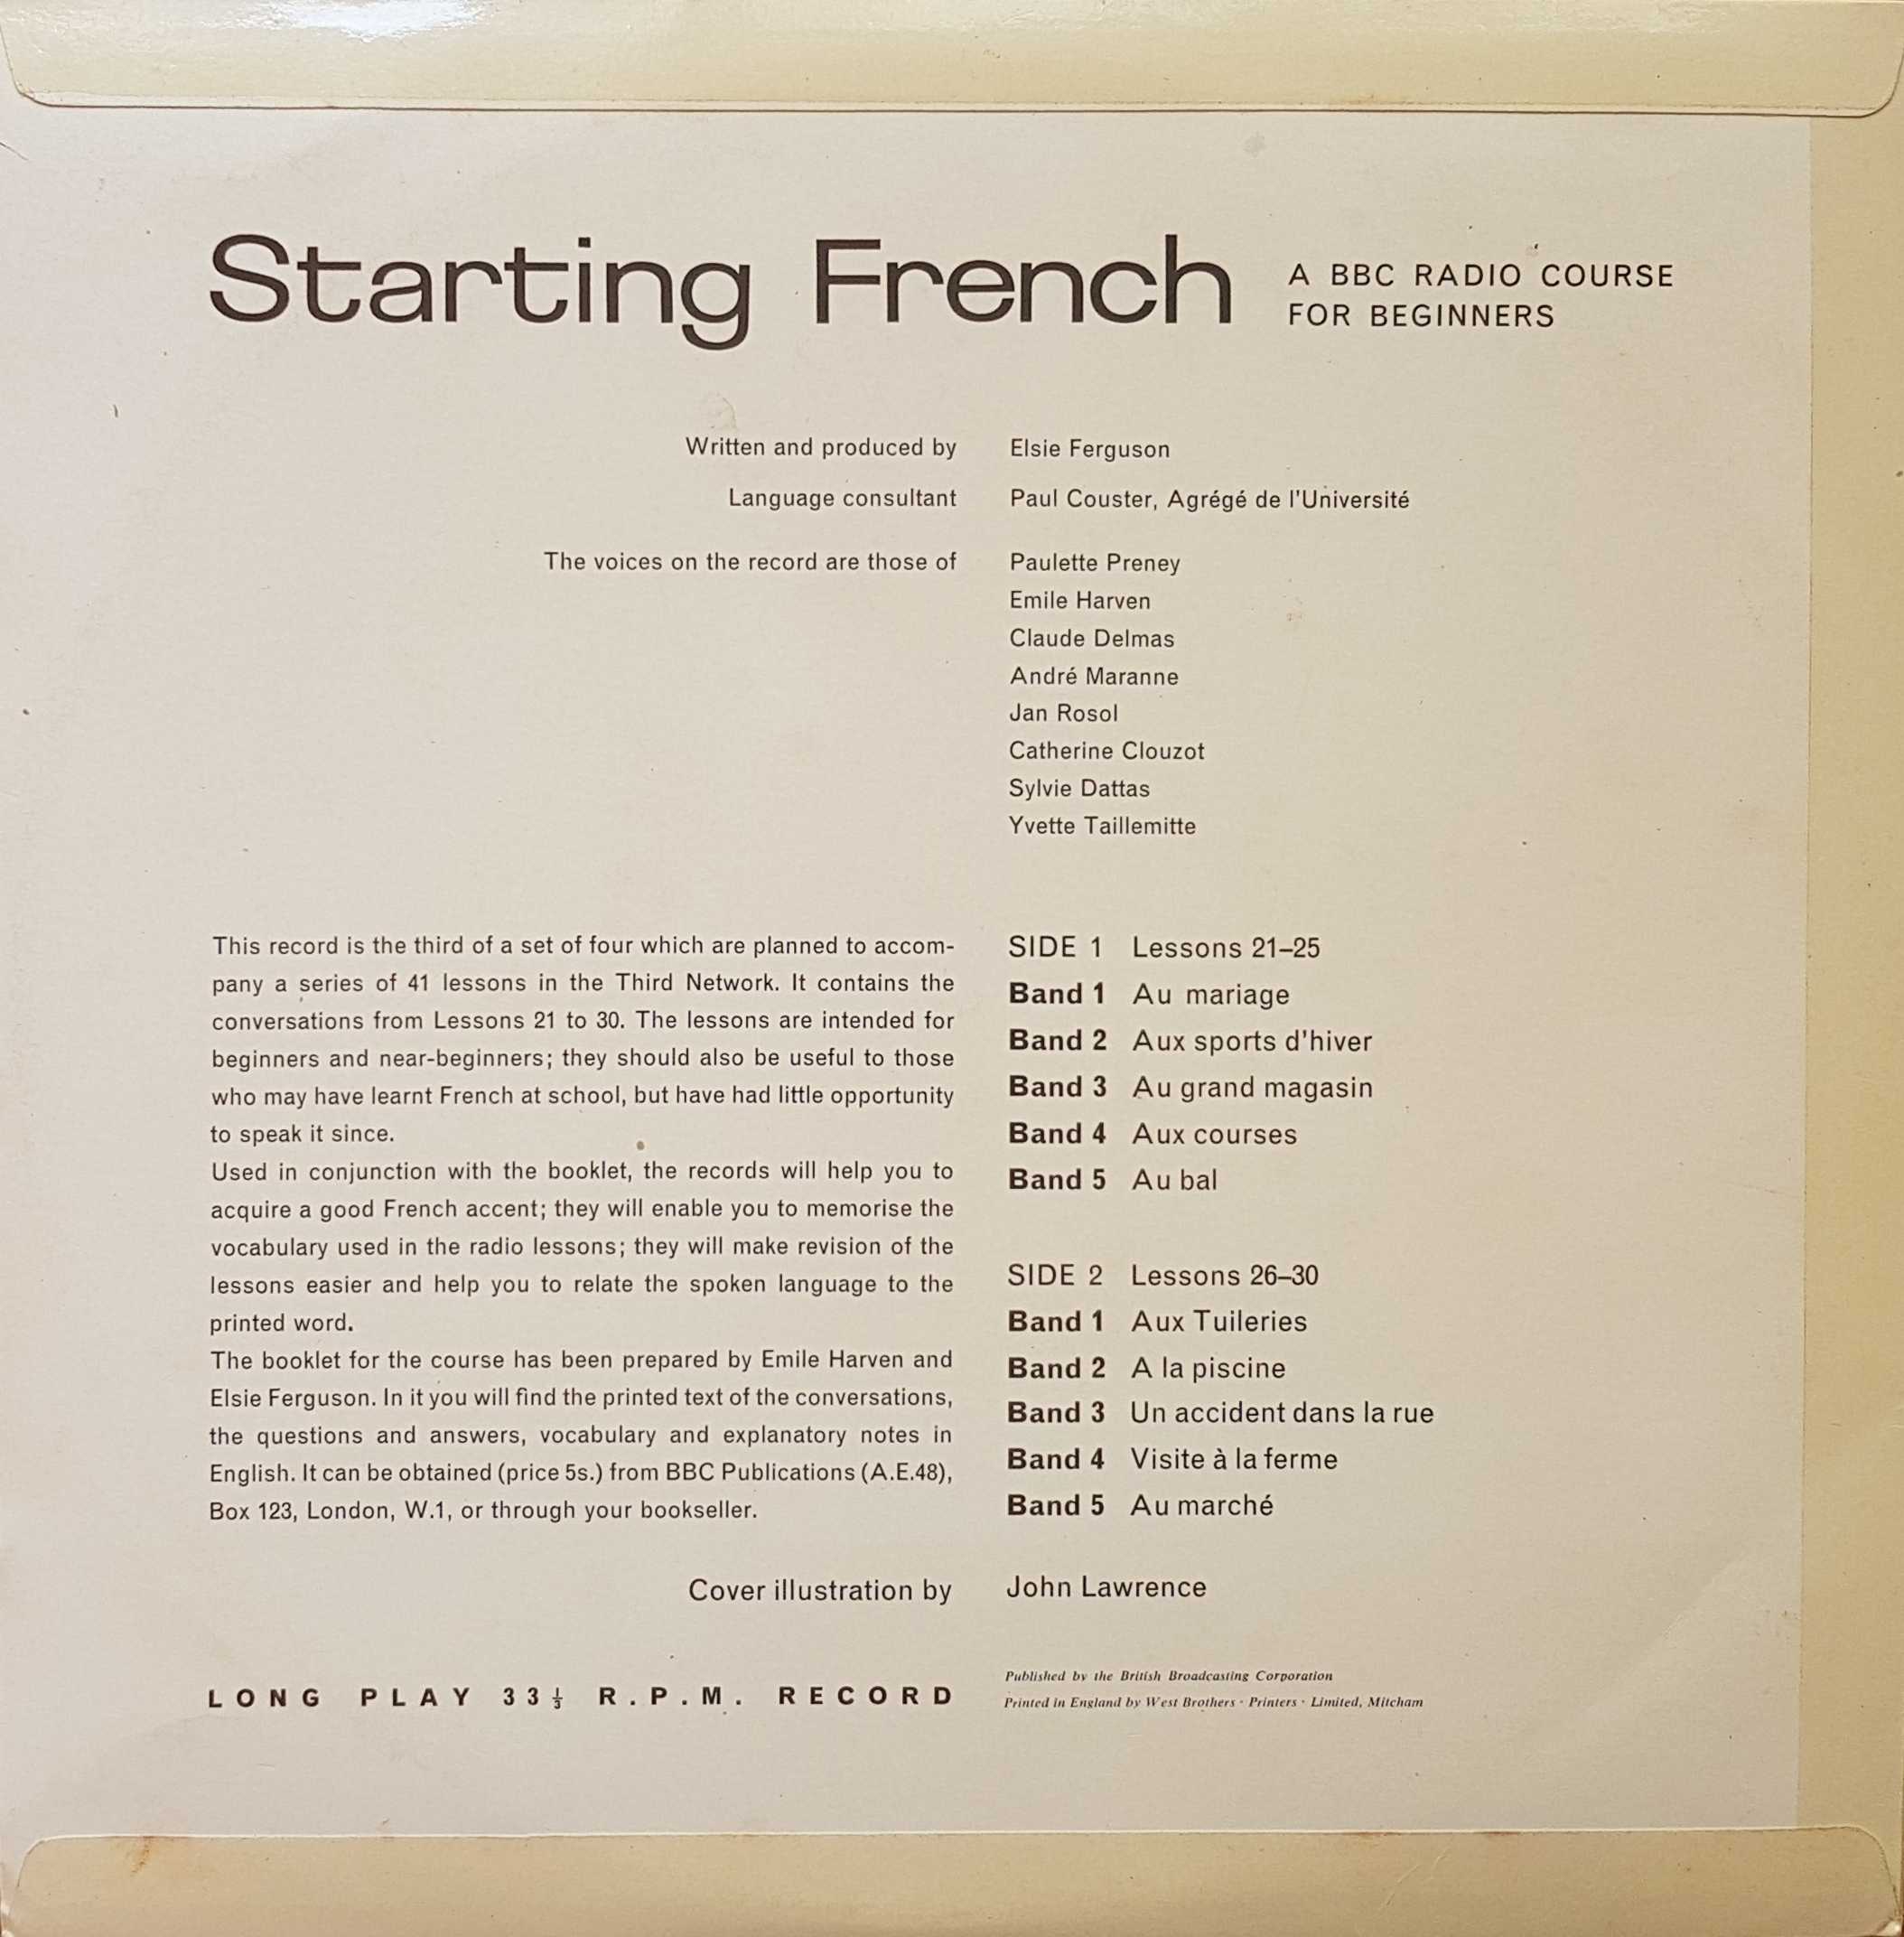 Picture of OP 21/22 Starting French - Parts 21 - 30 by artist Elsie Ferguson from the BBC records and Tapes library